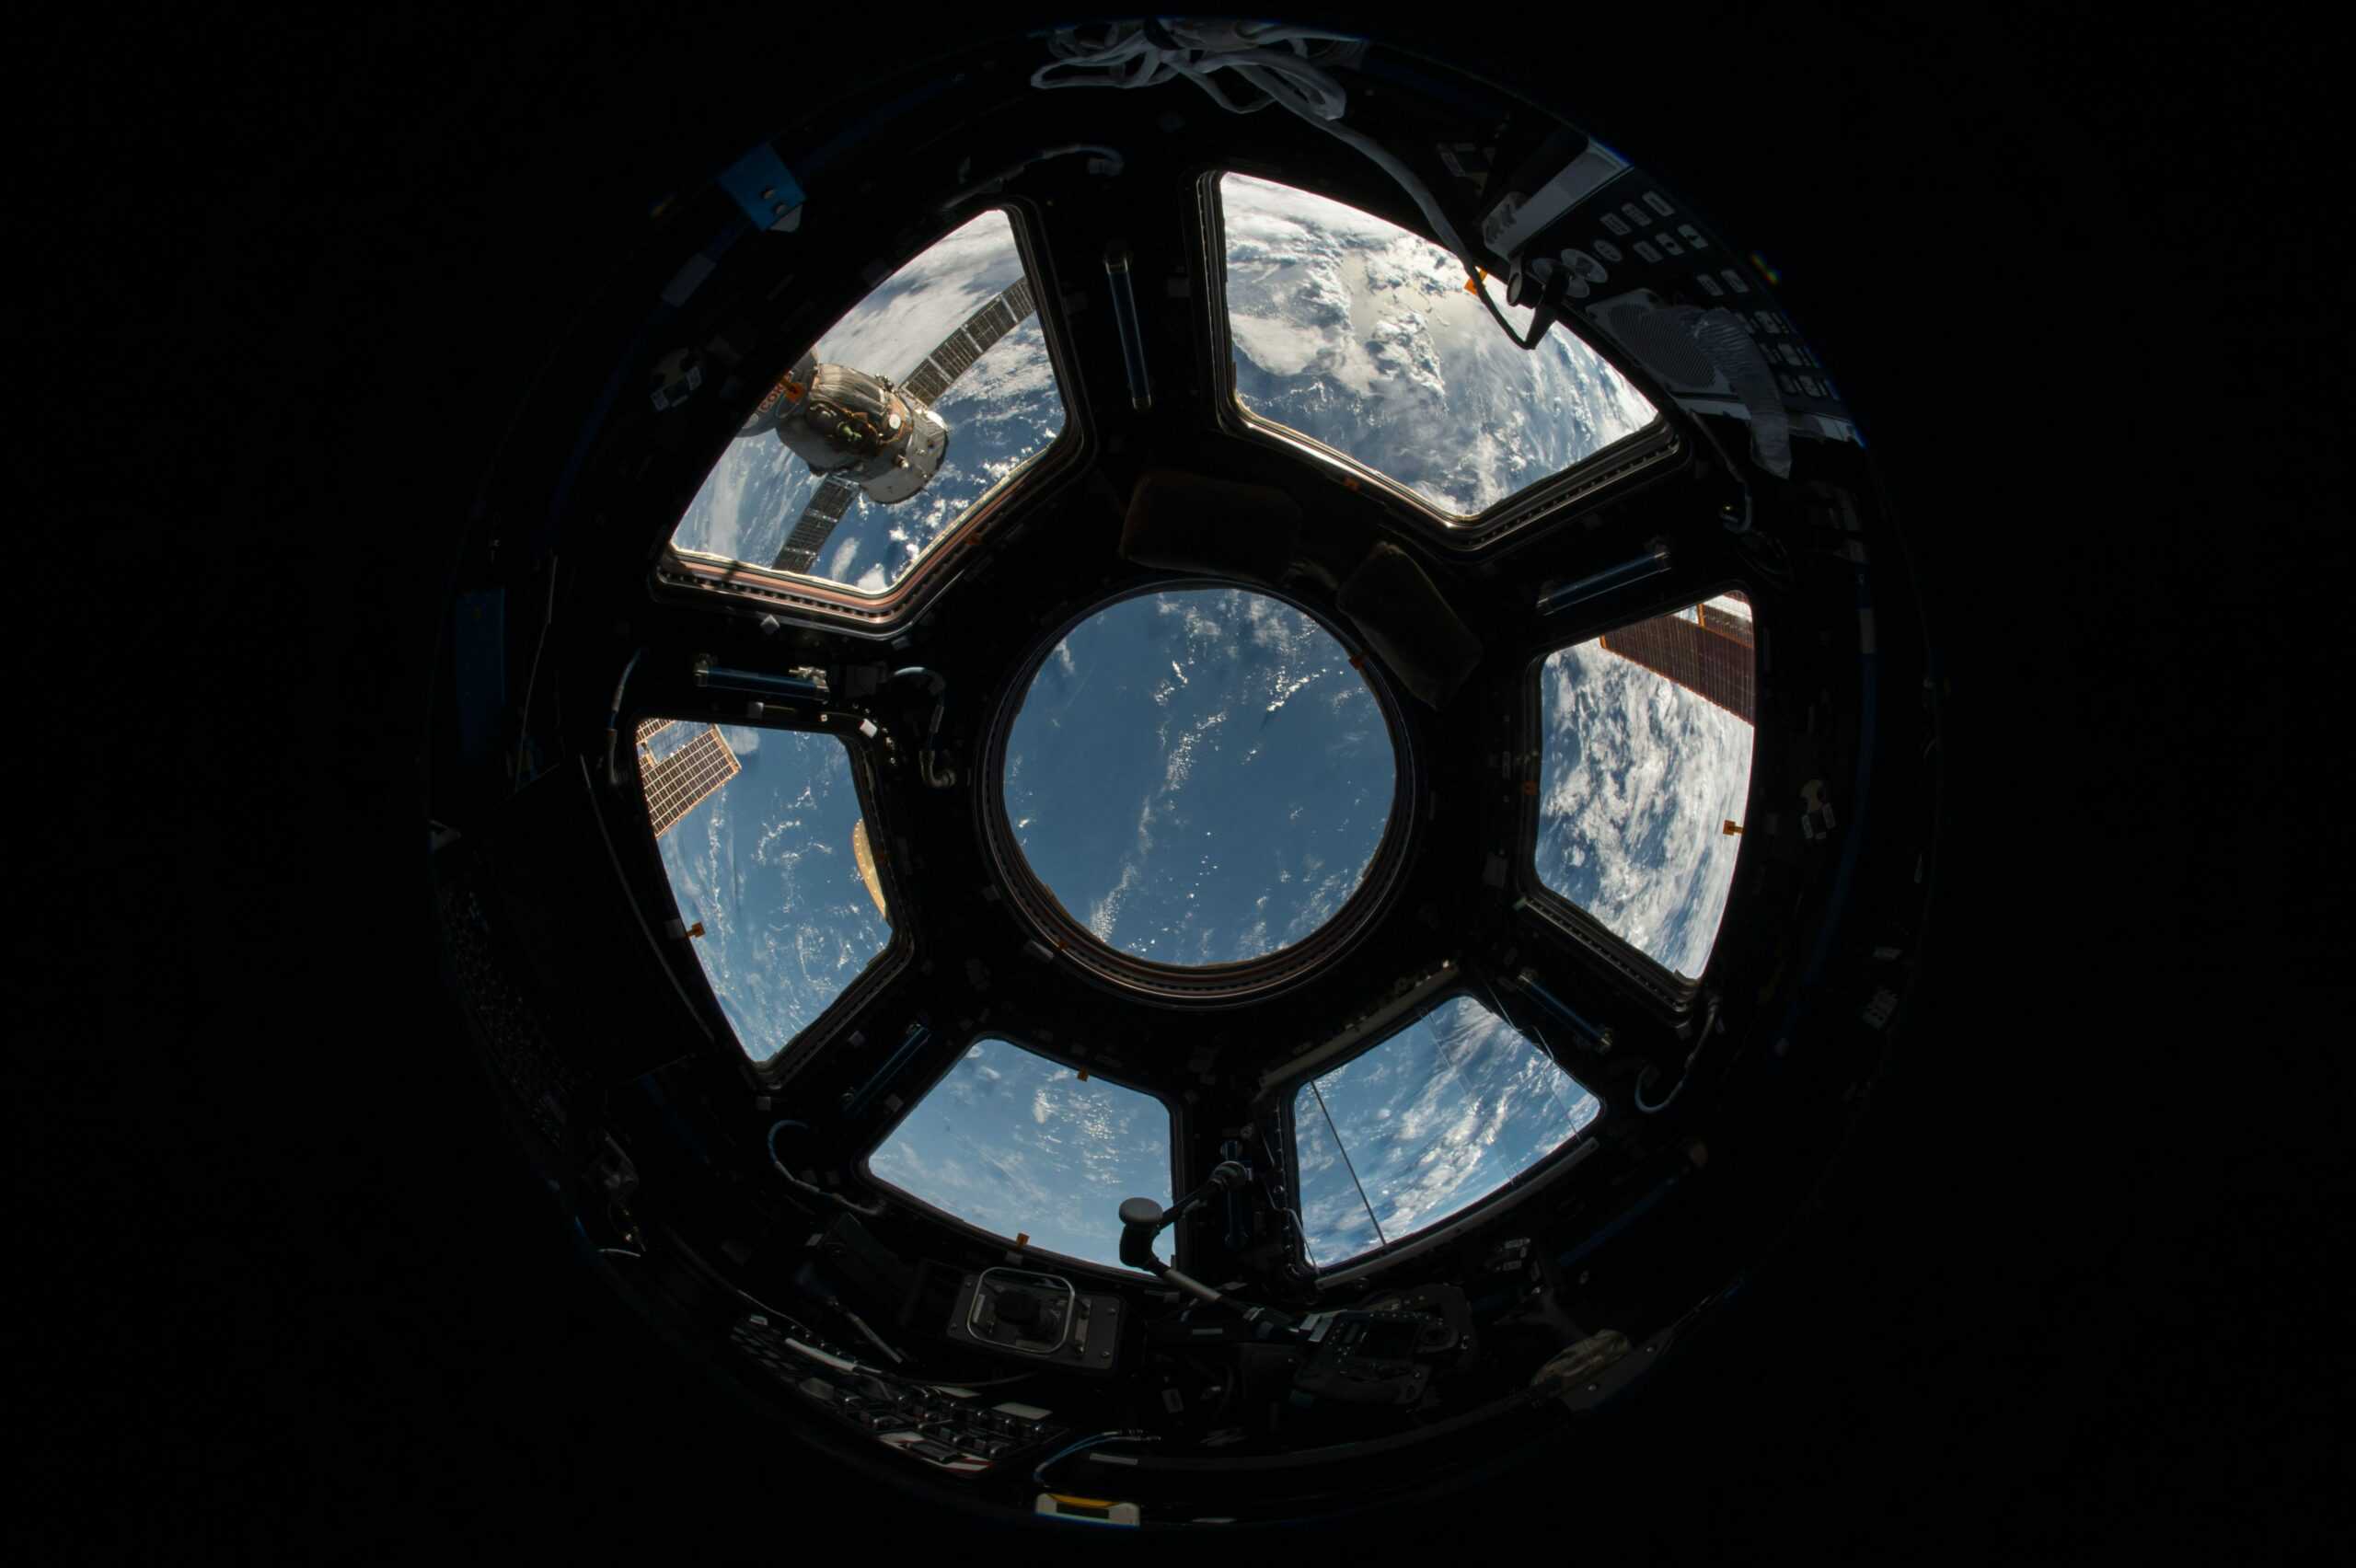 Photo shows image of earth from inside a satellite.